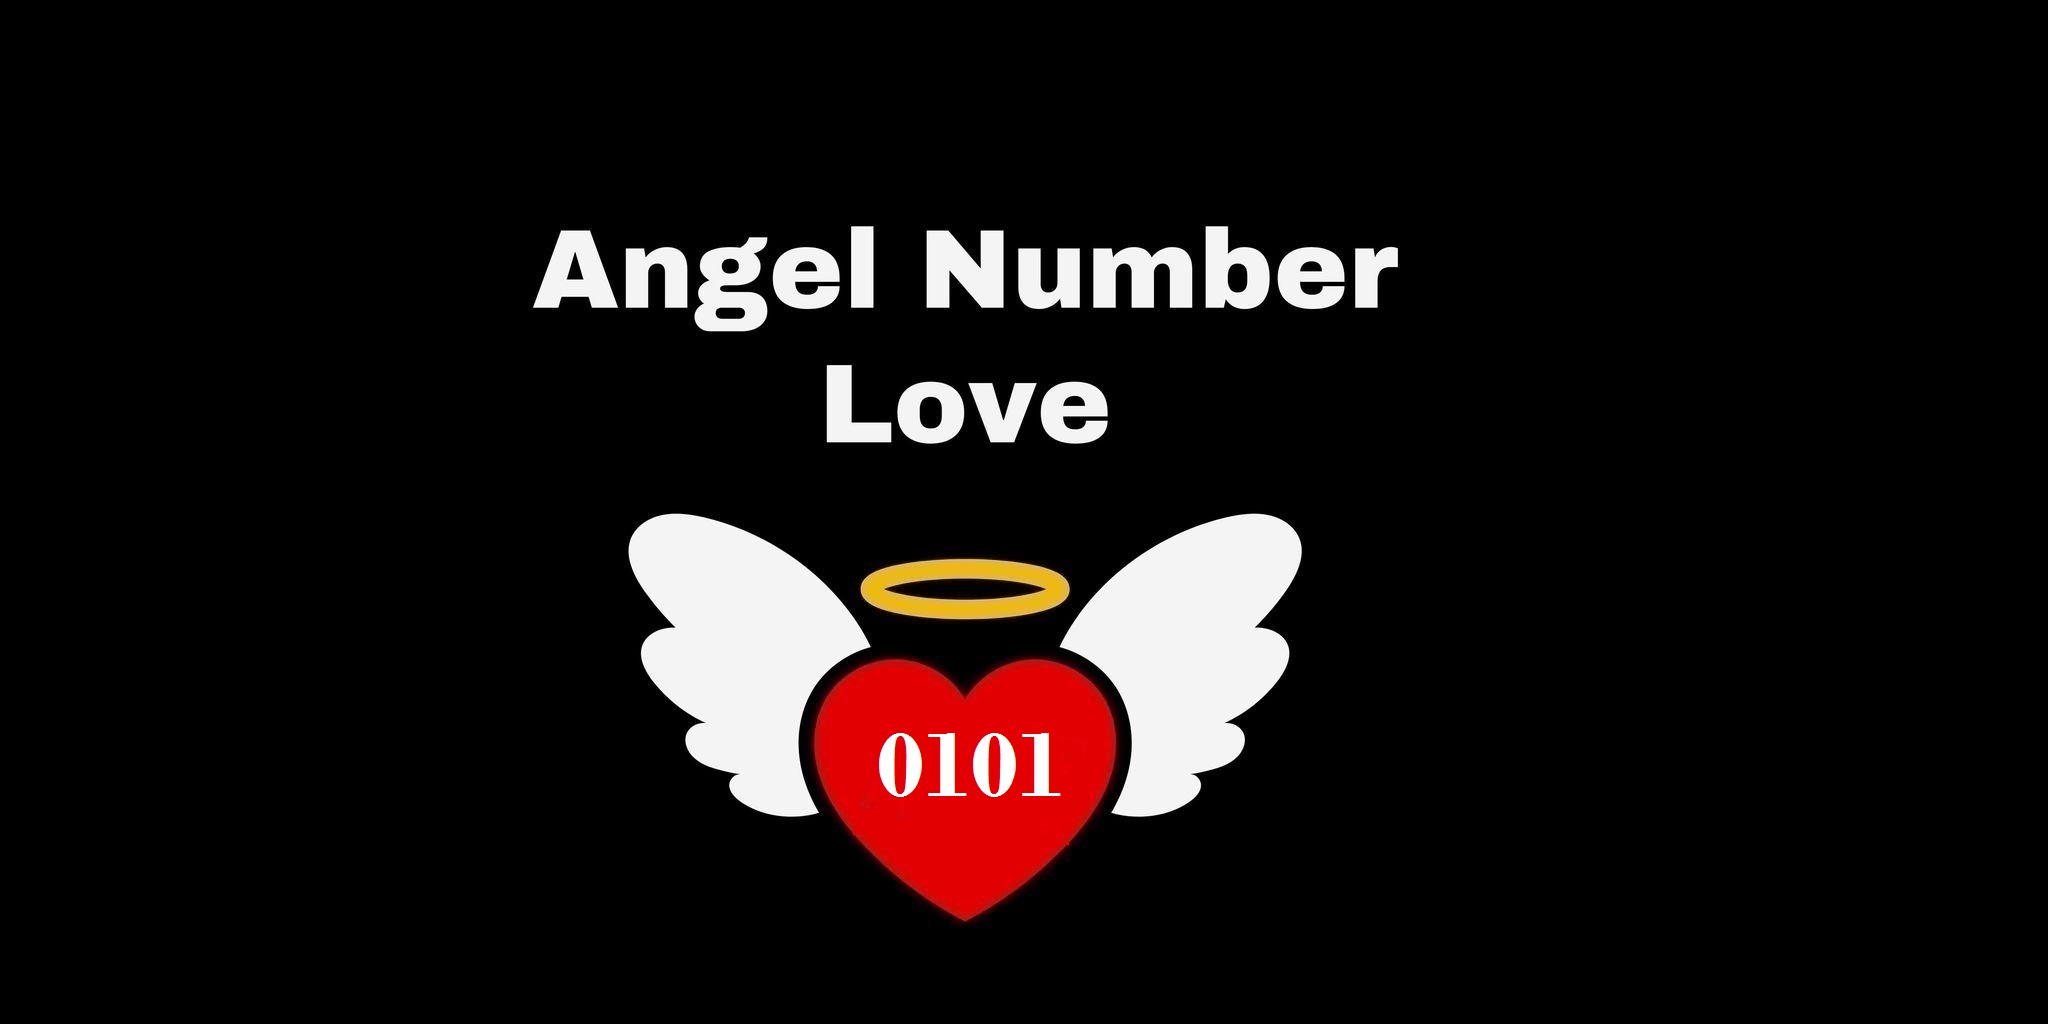 0101 Angel Number Meaning In Love